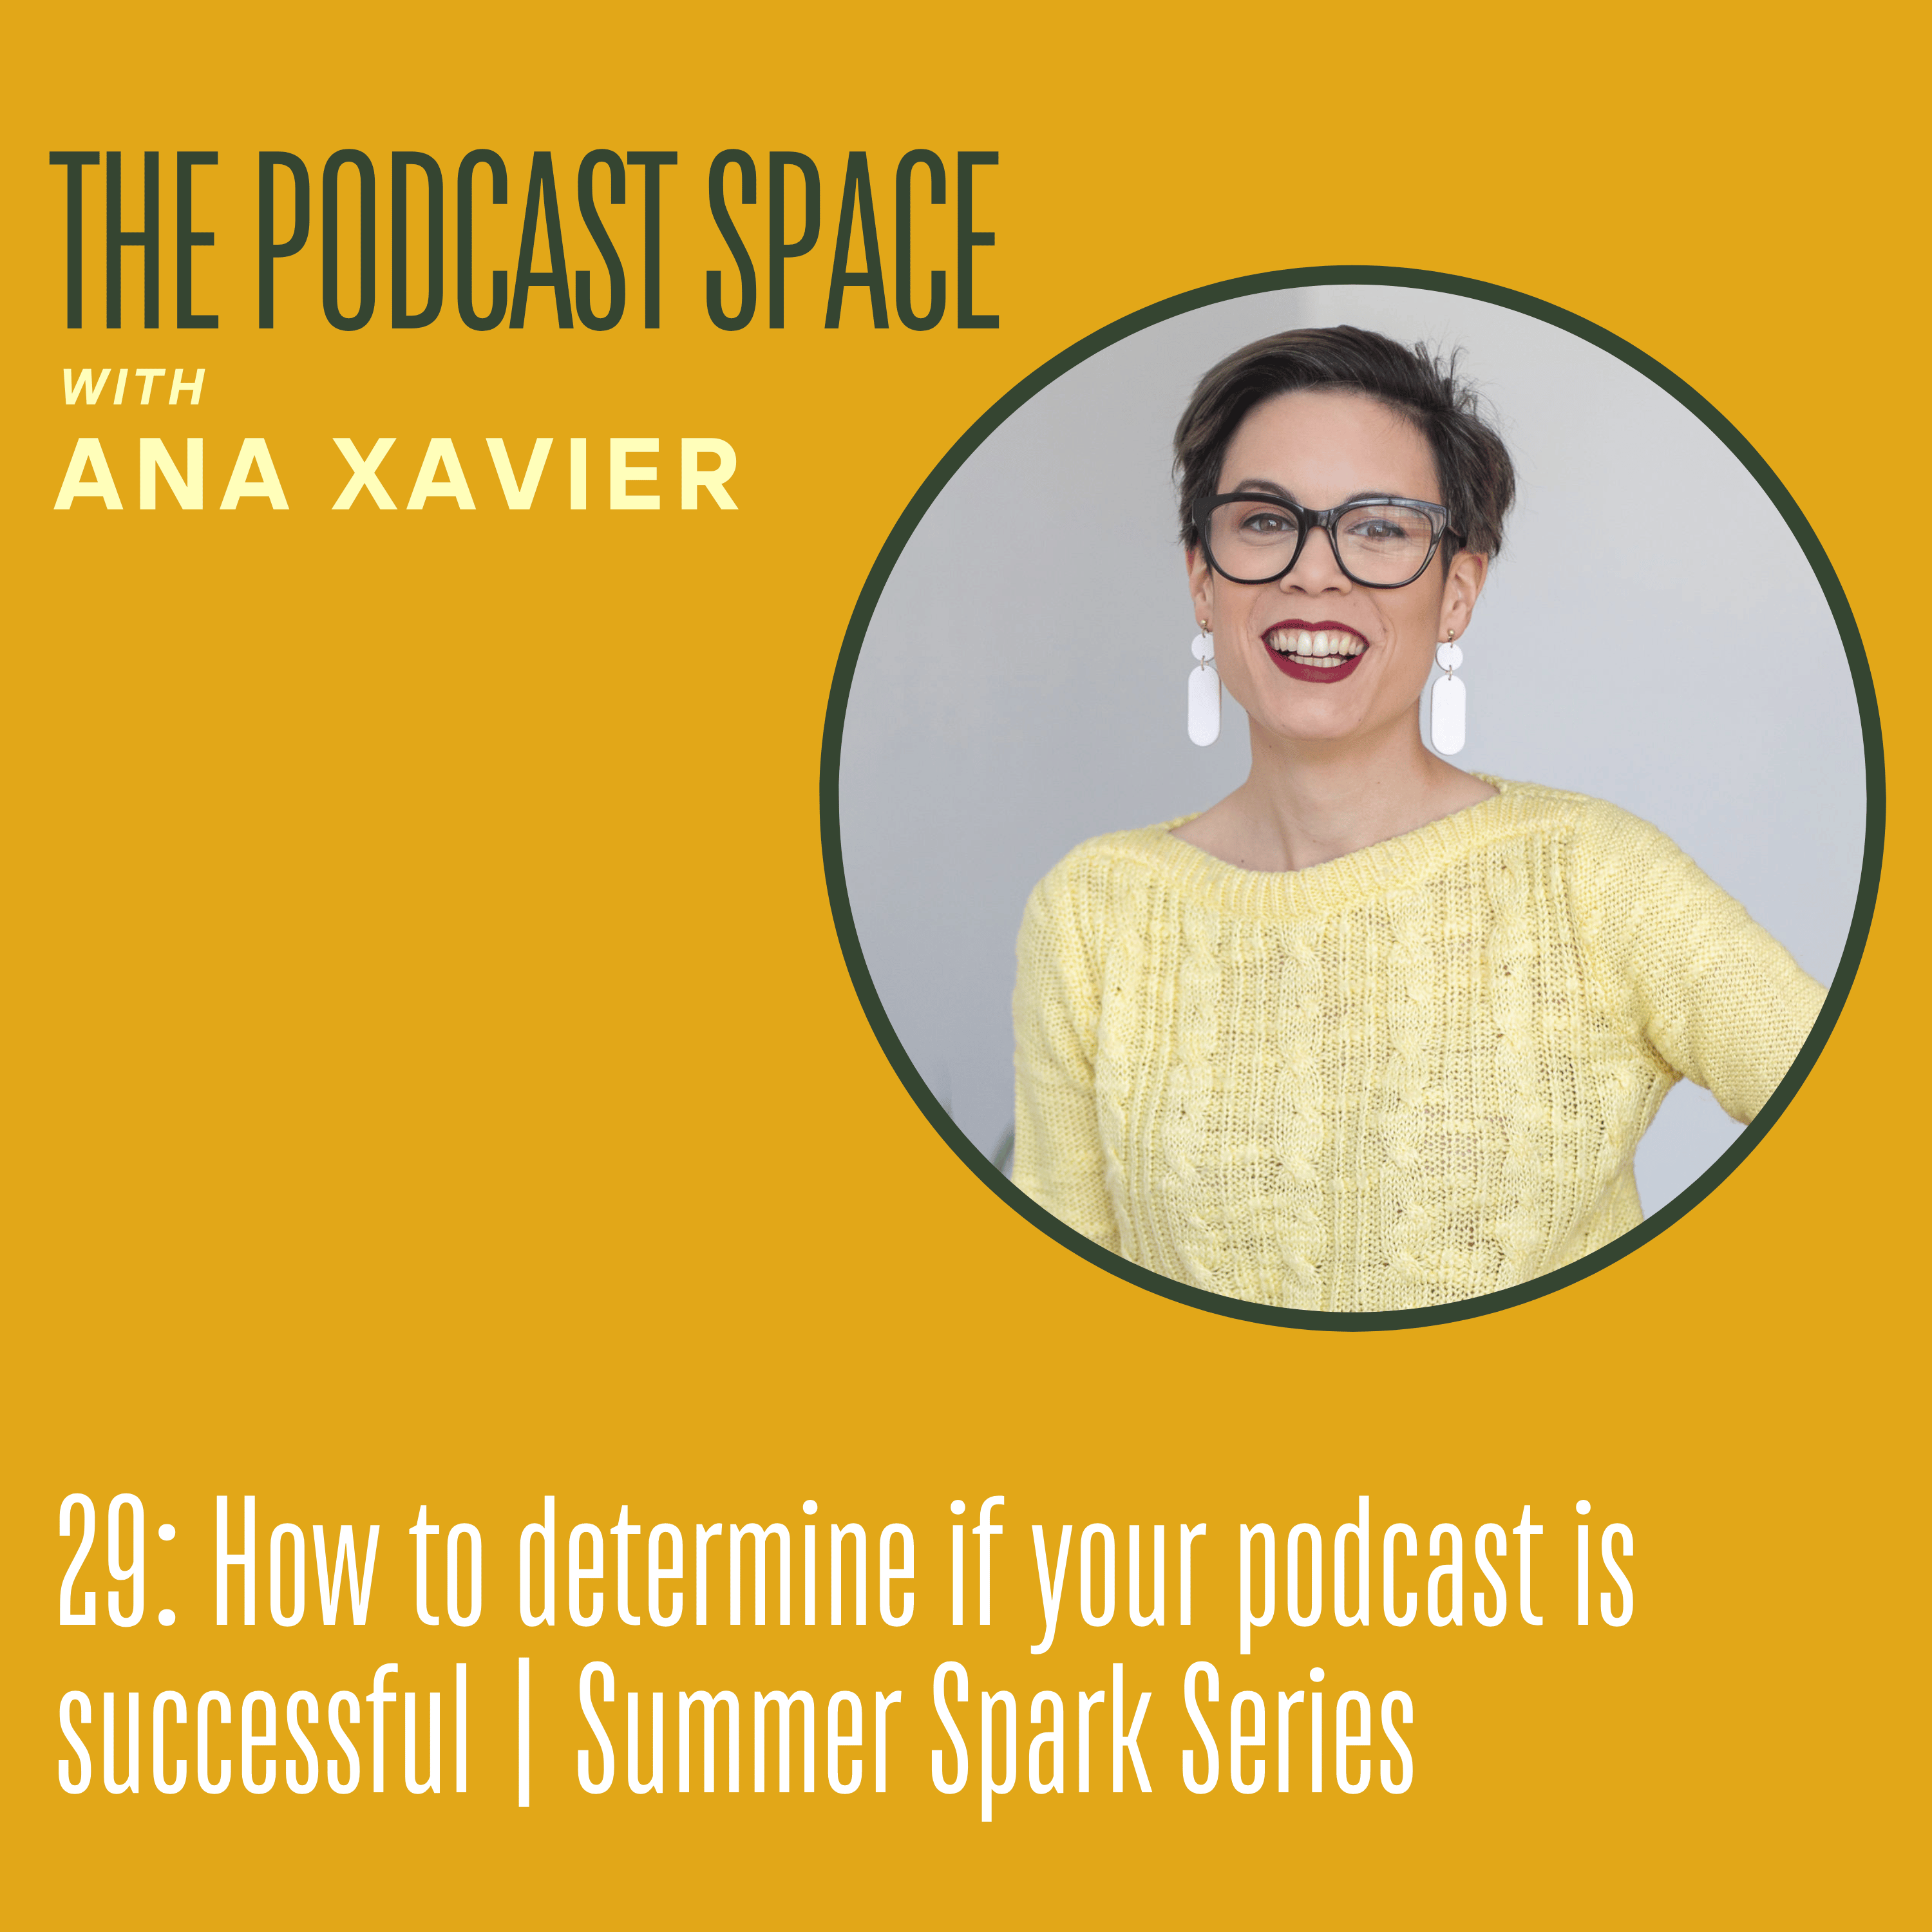 29. How to determine if your podcast is successful: Summer Spark Series